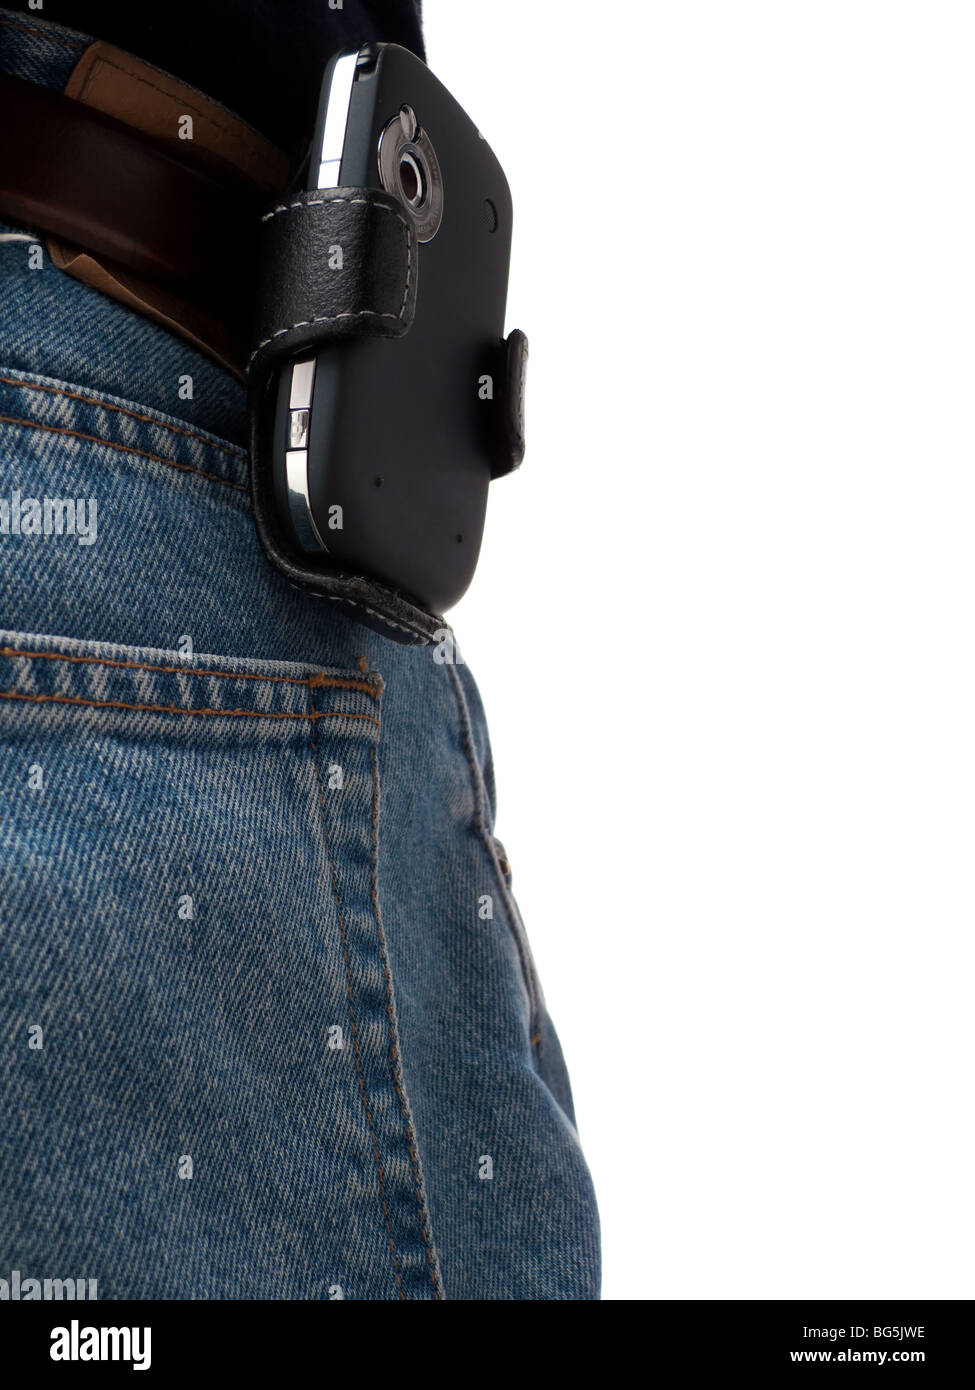 A PDA (Windows Mobile device) in a holster, attached to a belt of an IT worker, wearing jeans, shot from behind. Stock Photo